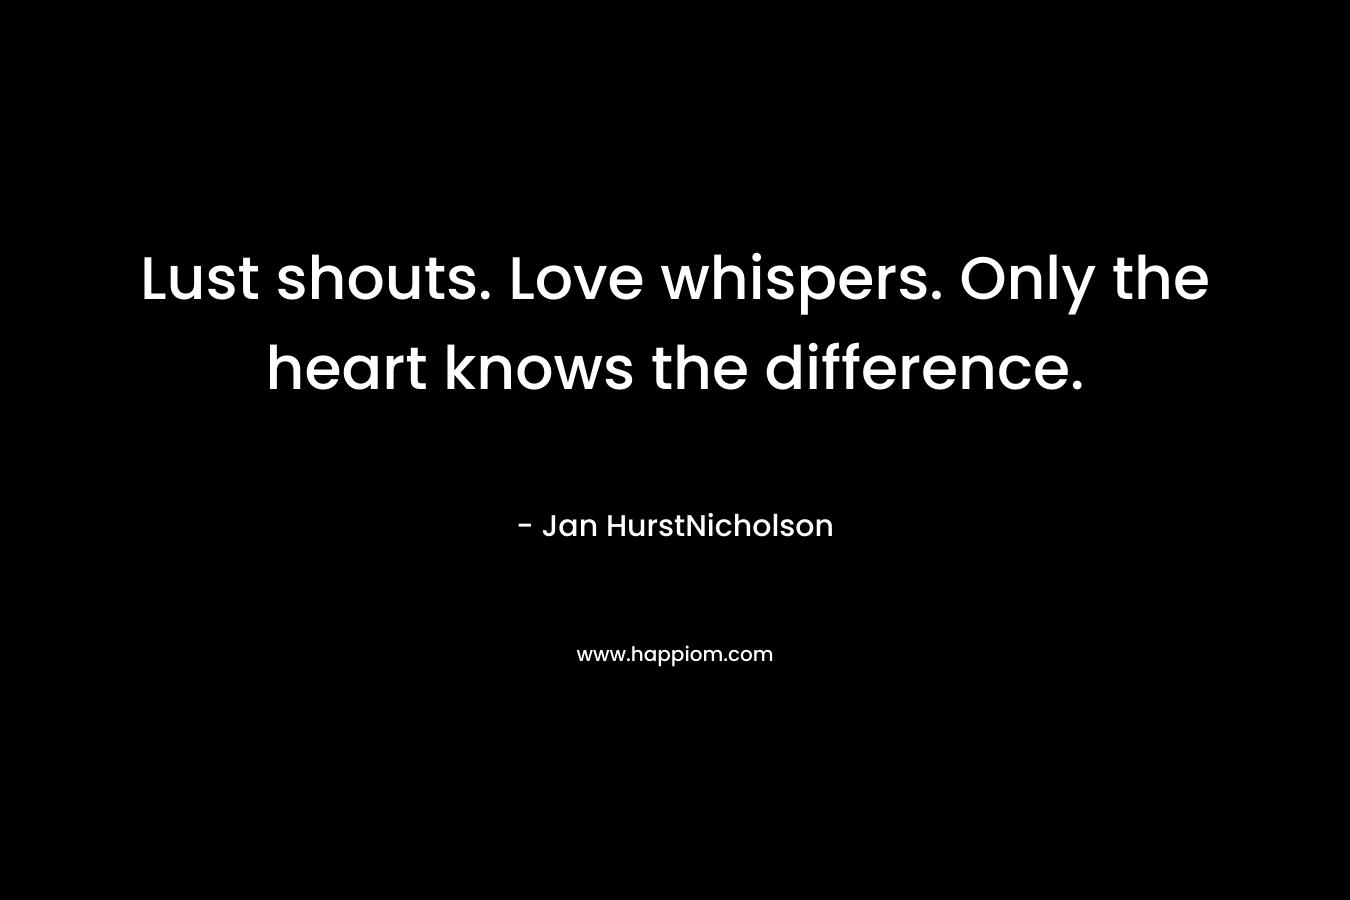 Lust shouts. Love whispers. Only the heart knows the difference. – Jan HurstNicholson